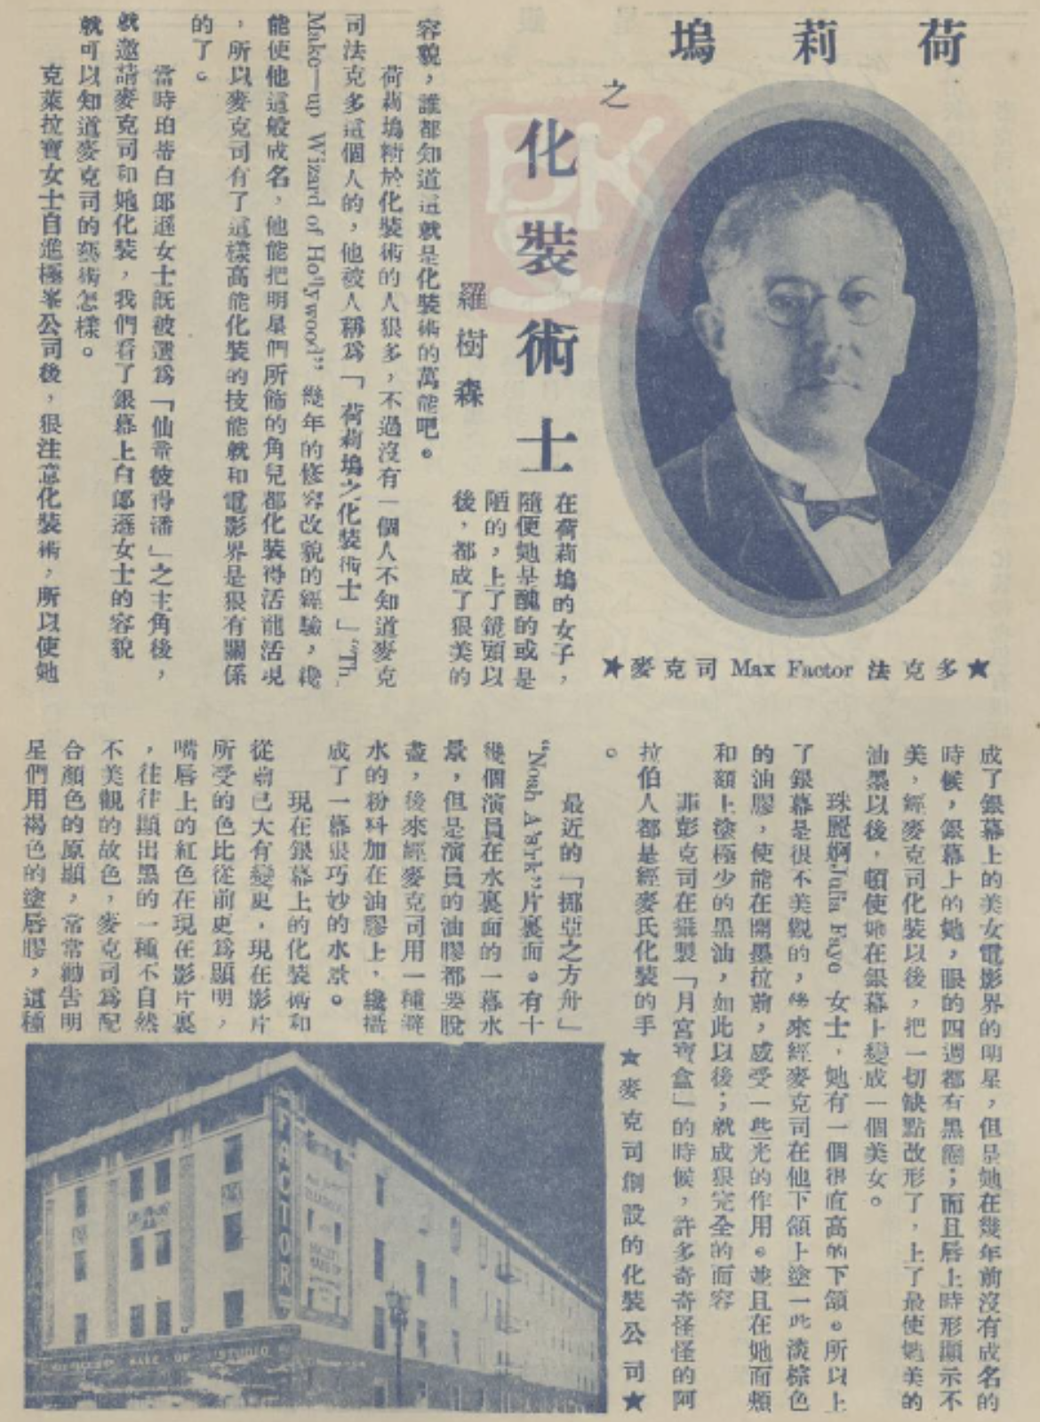 1929 profile of Max Factor in Chinese movie magazine "Silverland"